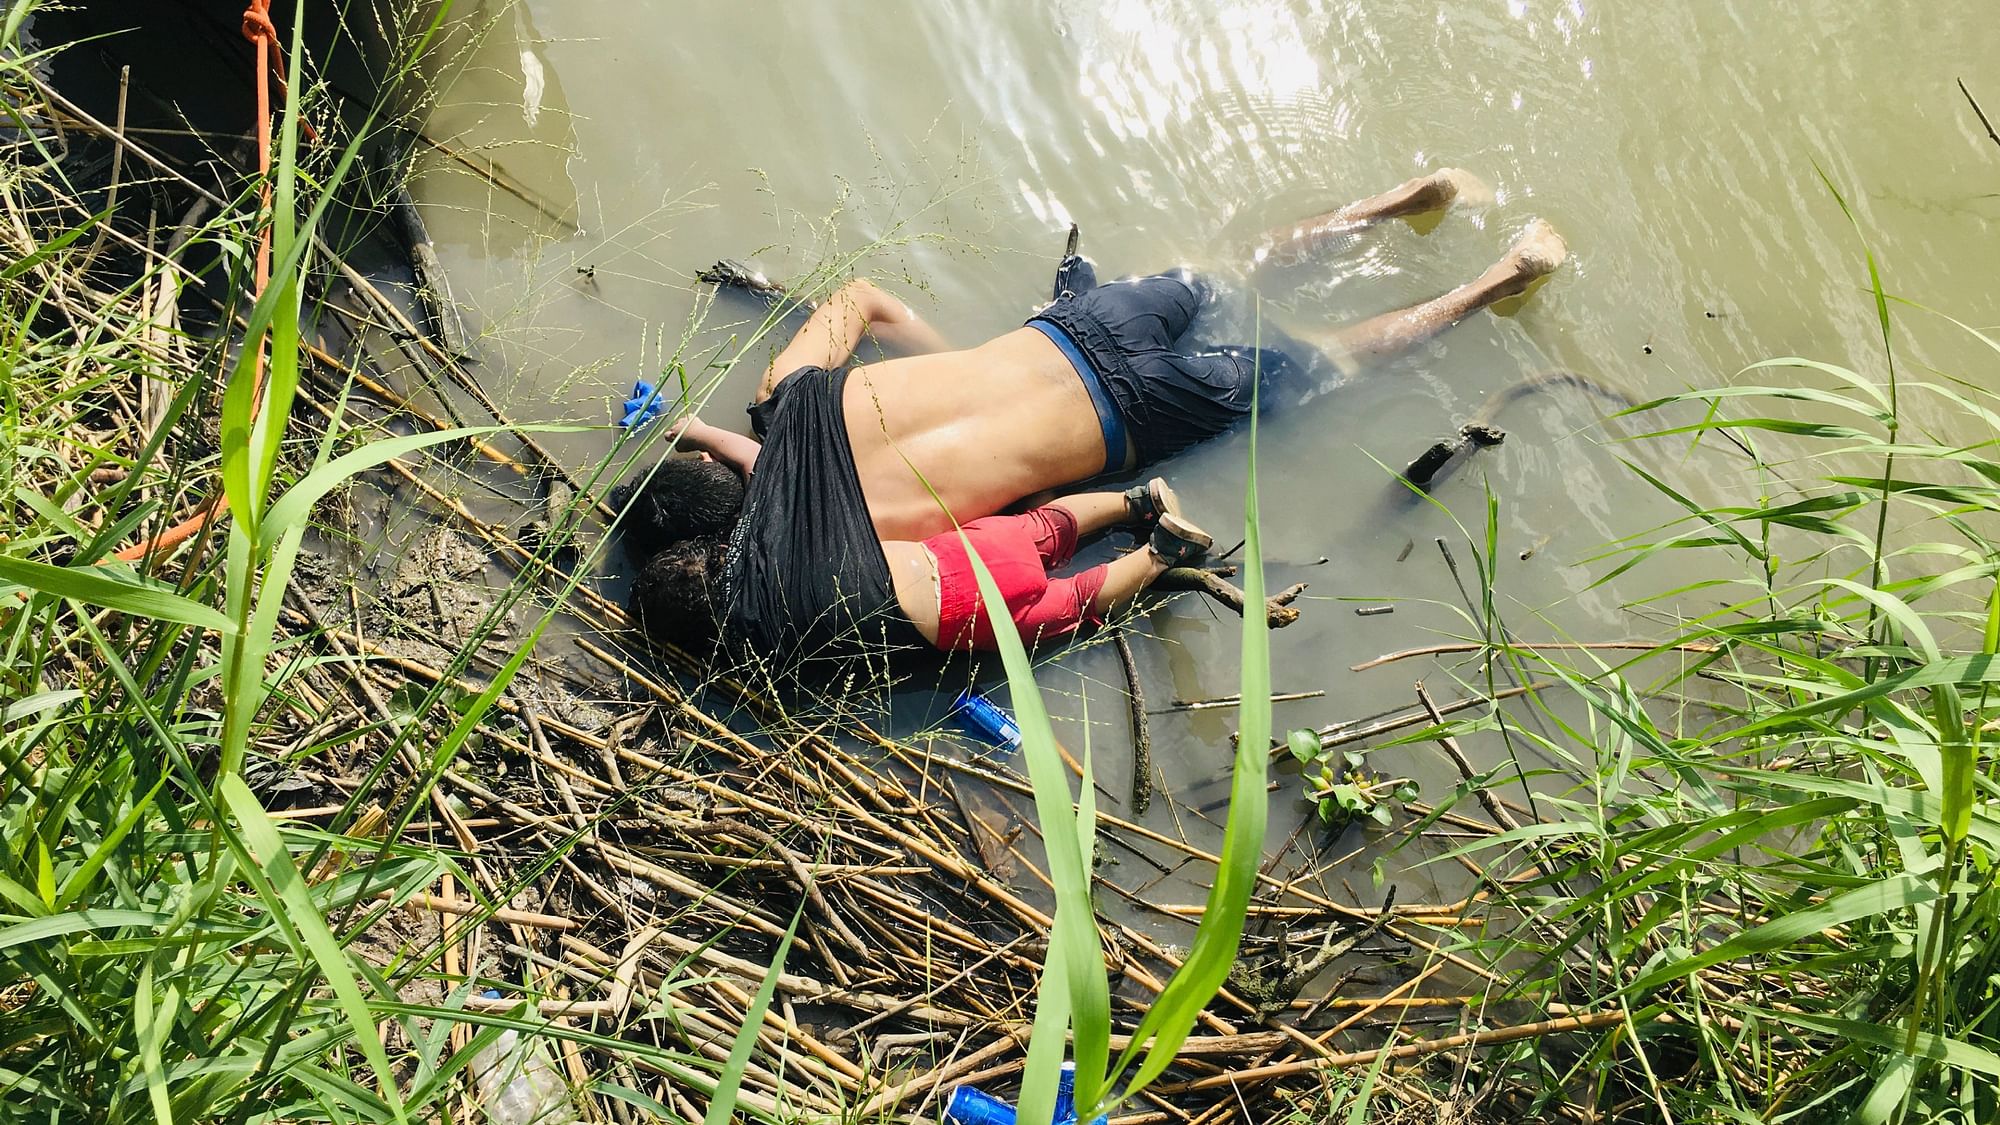 The bodies of two Salvadoran migrants lie on the bank of the Rio Grande in Matamoros after they drowned trying to cross a river.